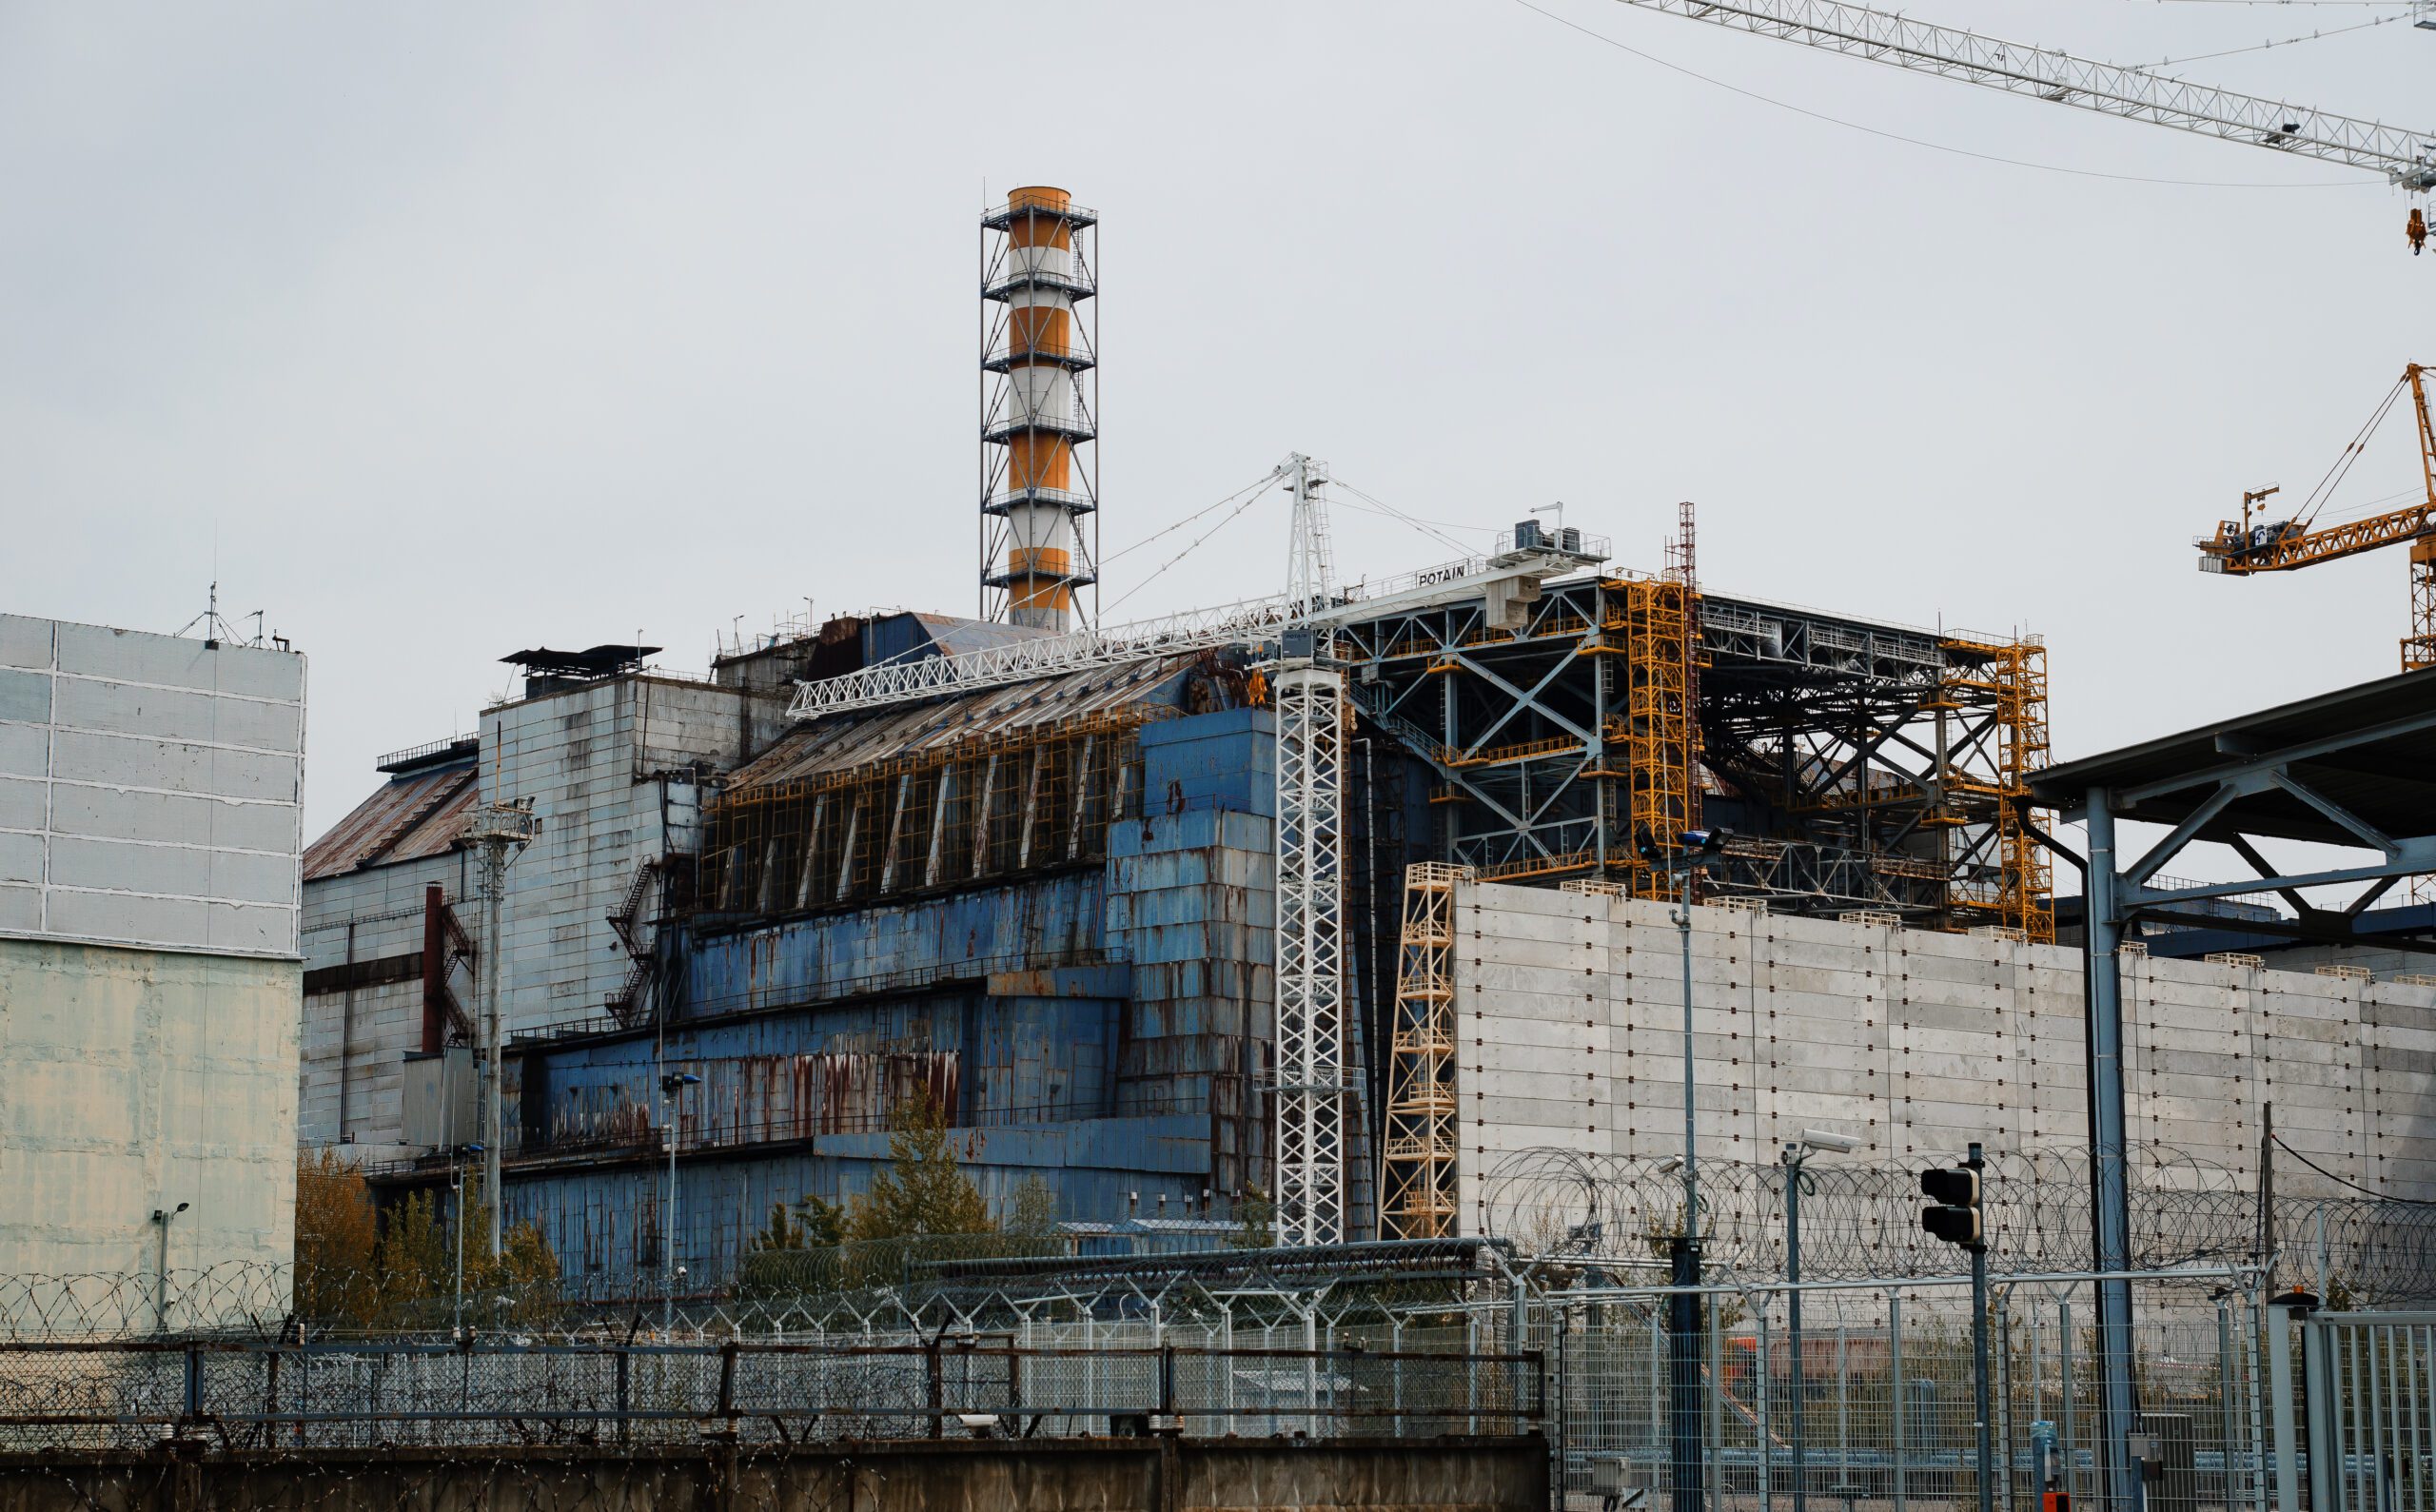 Fourth block of the Chernobyl nuclear power plant in 30 years after the explosion at the nuclear power plant.